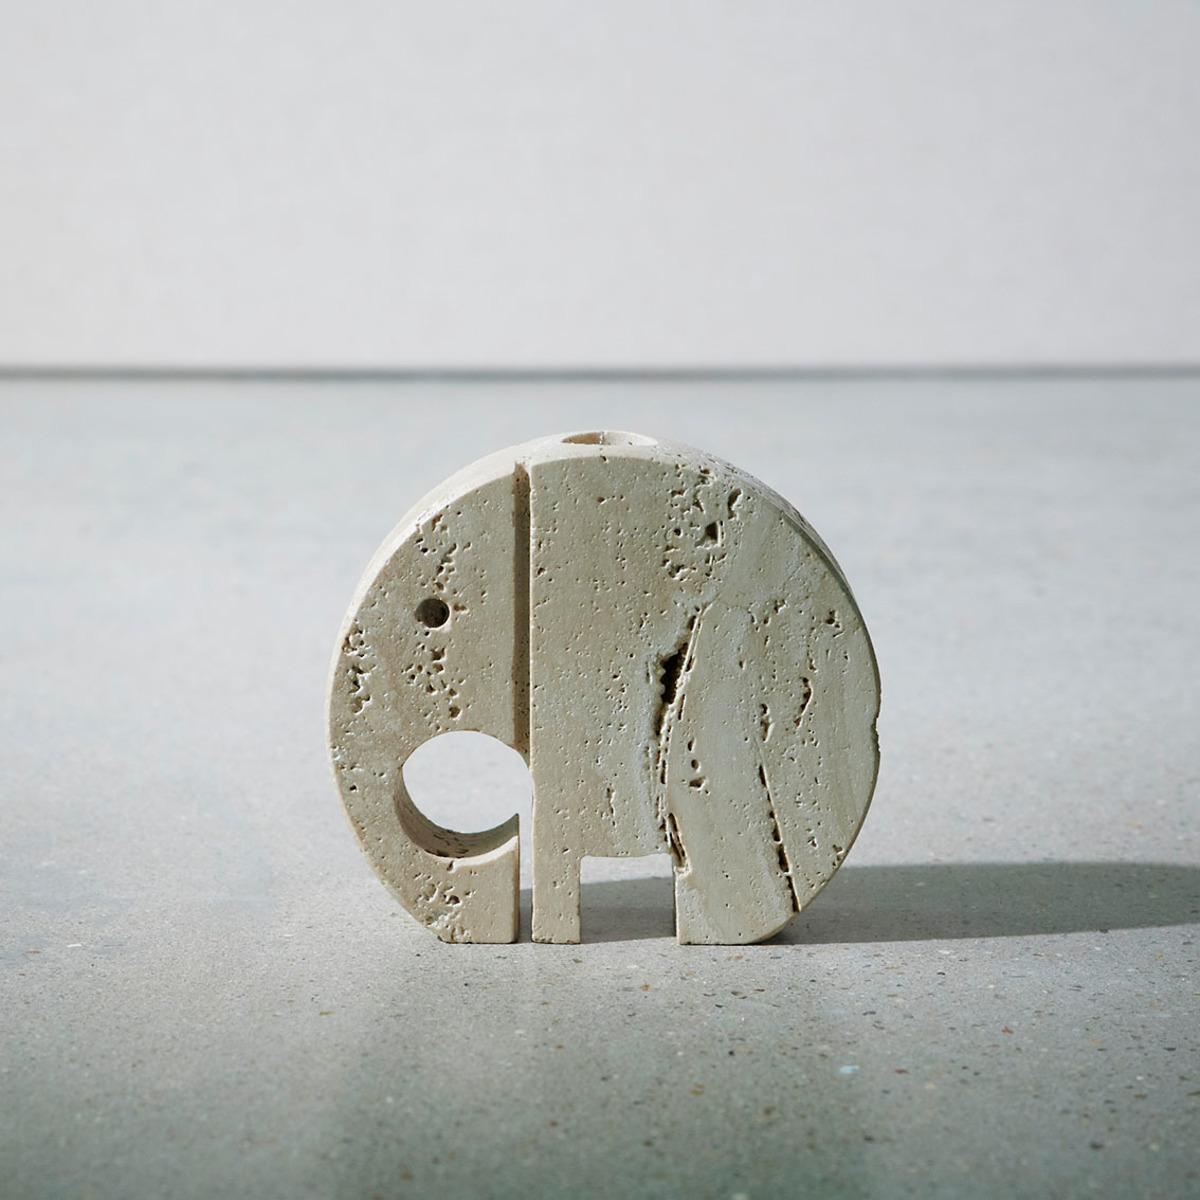 Elephant candle holder in Travertine by Fratelli Mannelli

Elephant candle holder in genuine travertine.

Additional information:
Material: Travertine
Artist: Fratelli Mannelli
Size: 12 W X 3 D X 12 H cm.